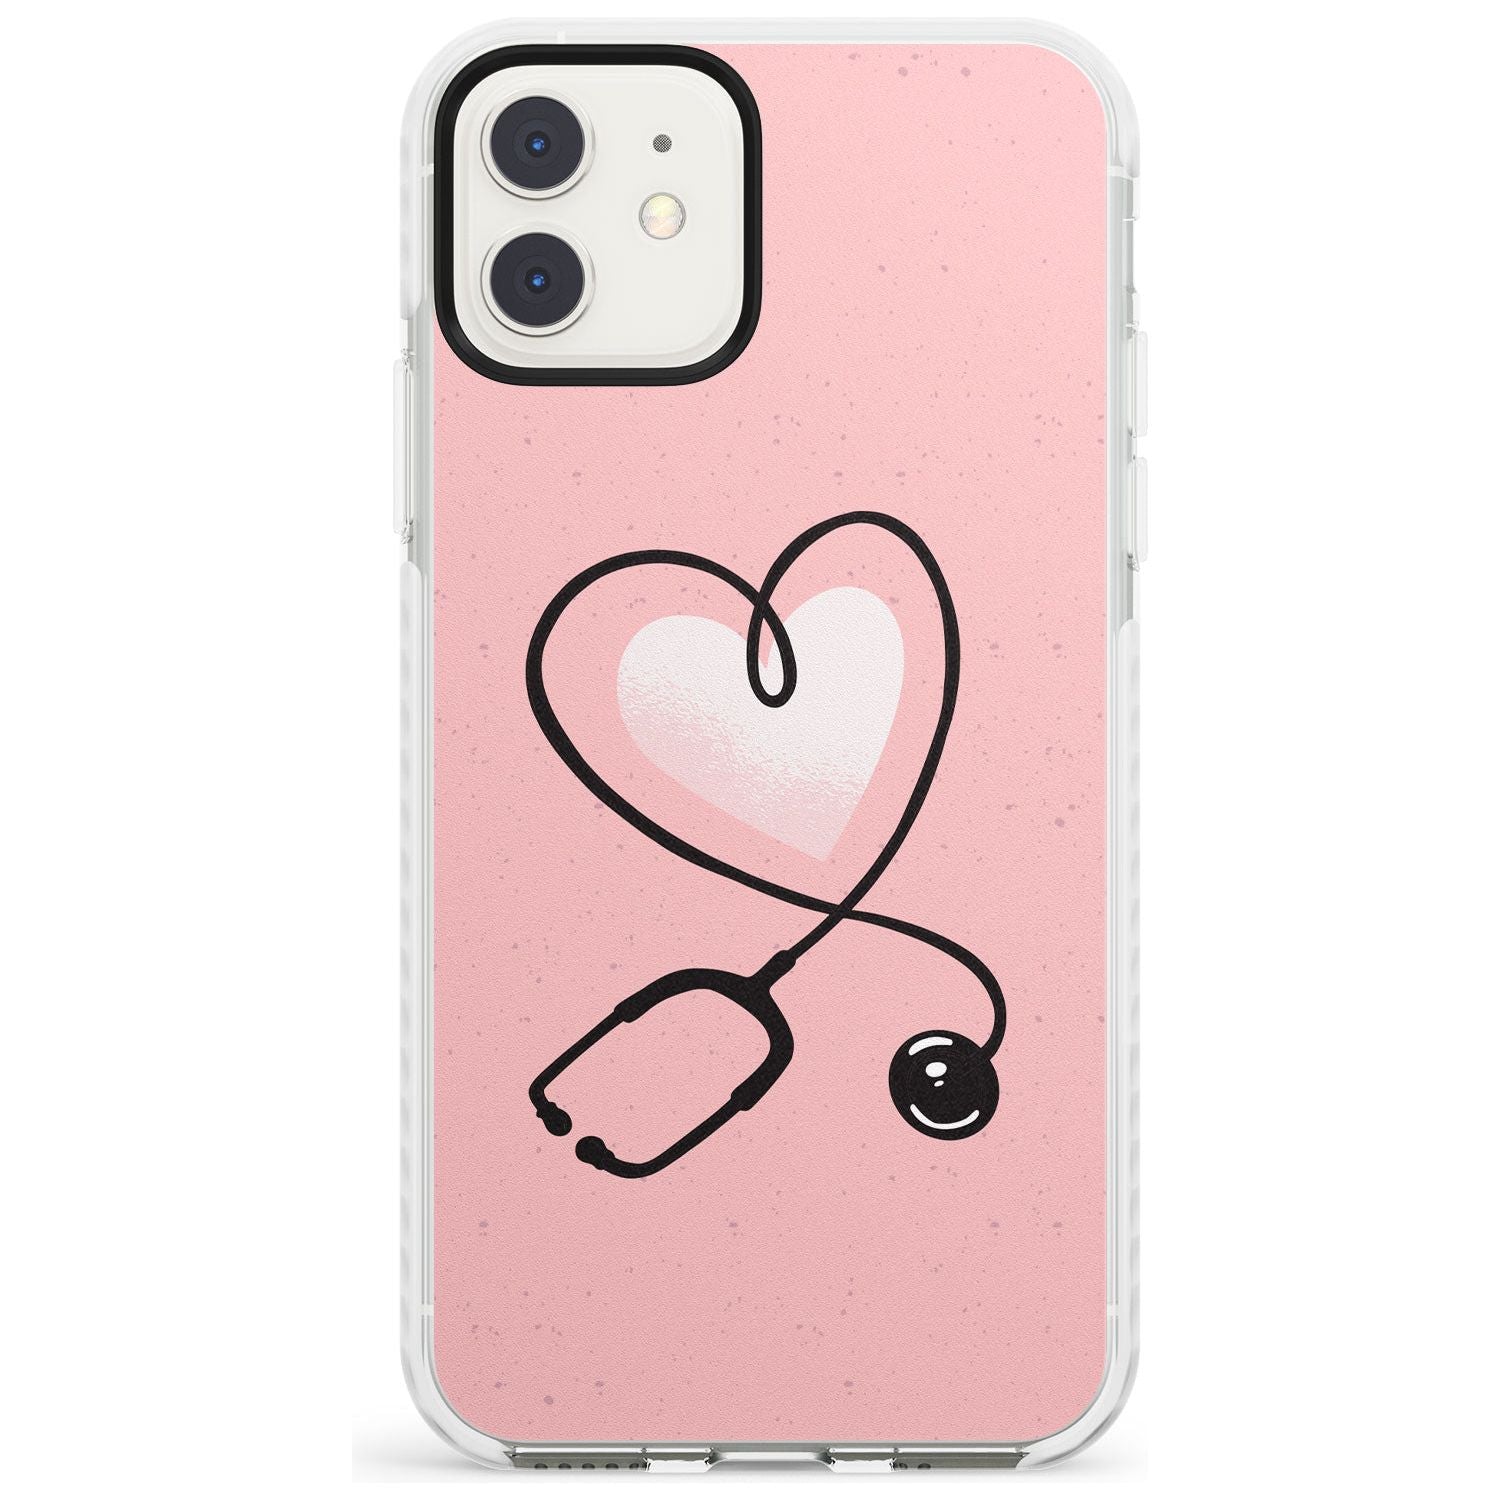 Medical Inspired Design Stethoscope Heart Impact Phone Case for iPhone 11